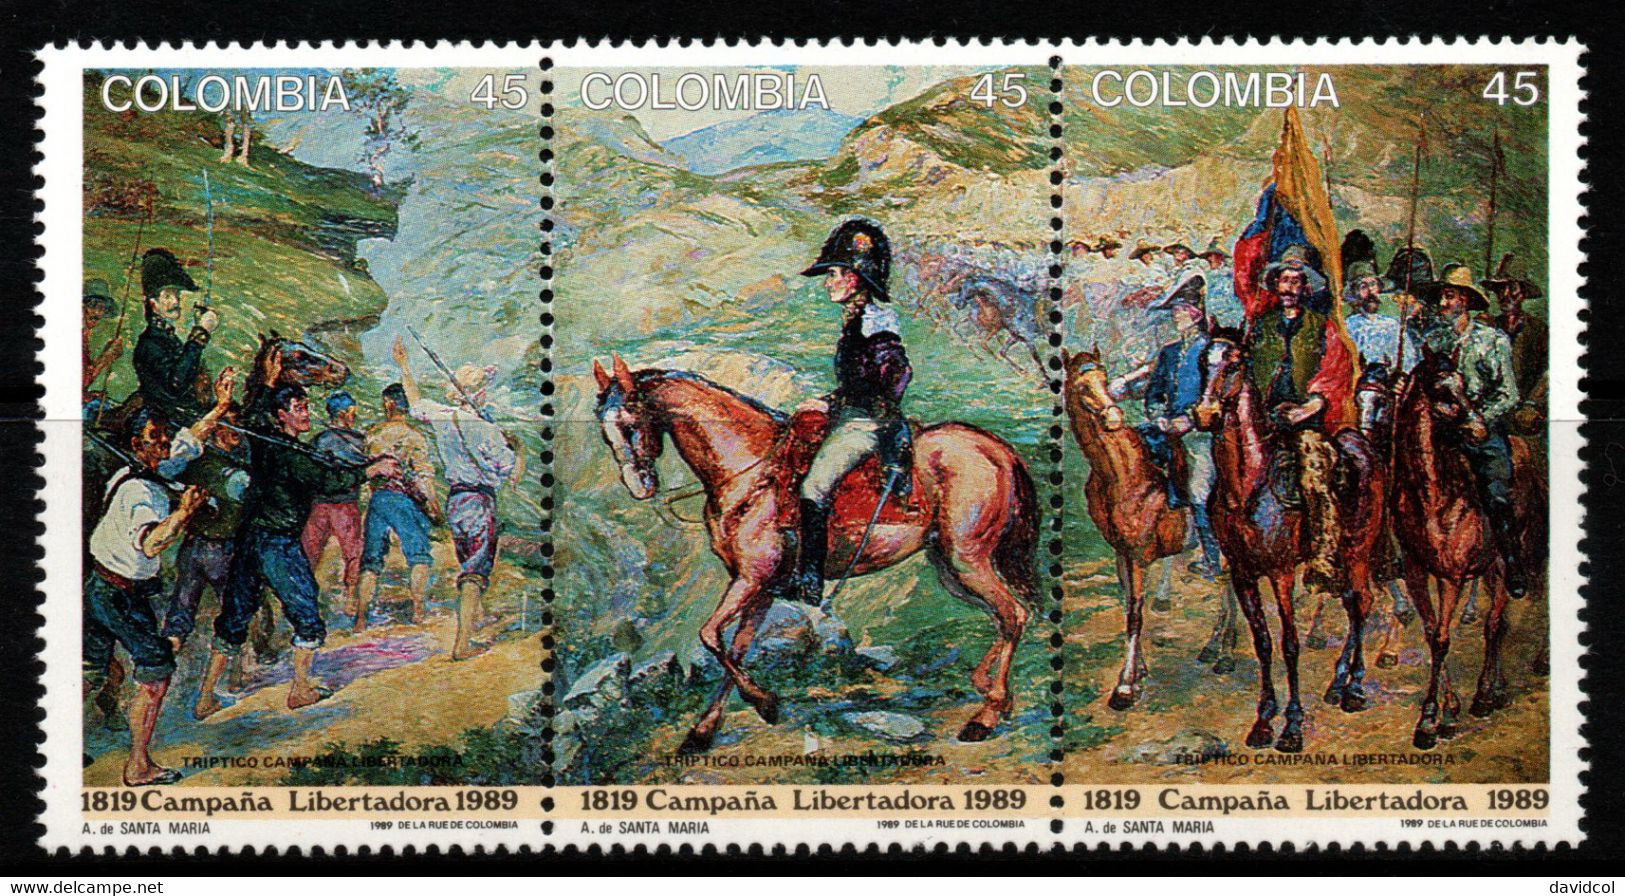 16A- KOLUMBIEN - 1989 - MI#:1766-1768 - MNH- 170 YEARS OF THE LIBERATION CAMPAIGN - Colombia